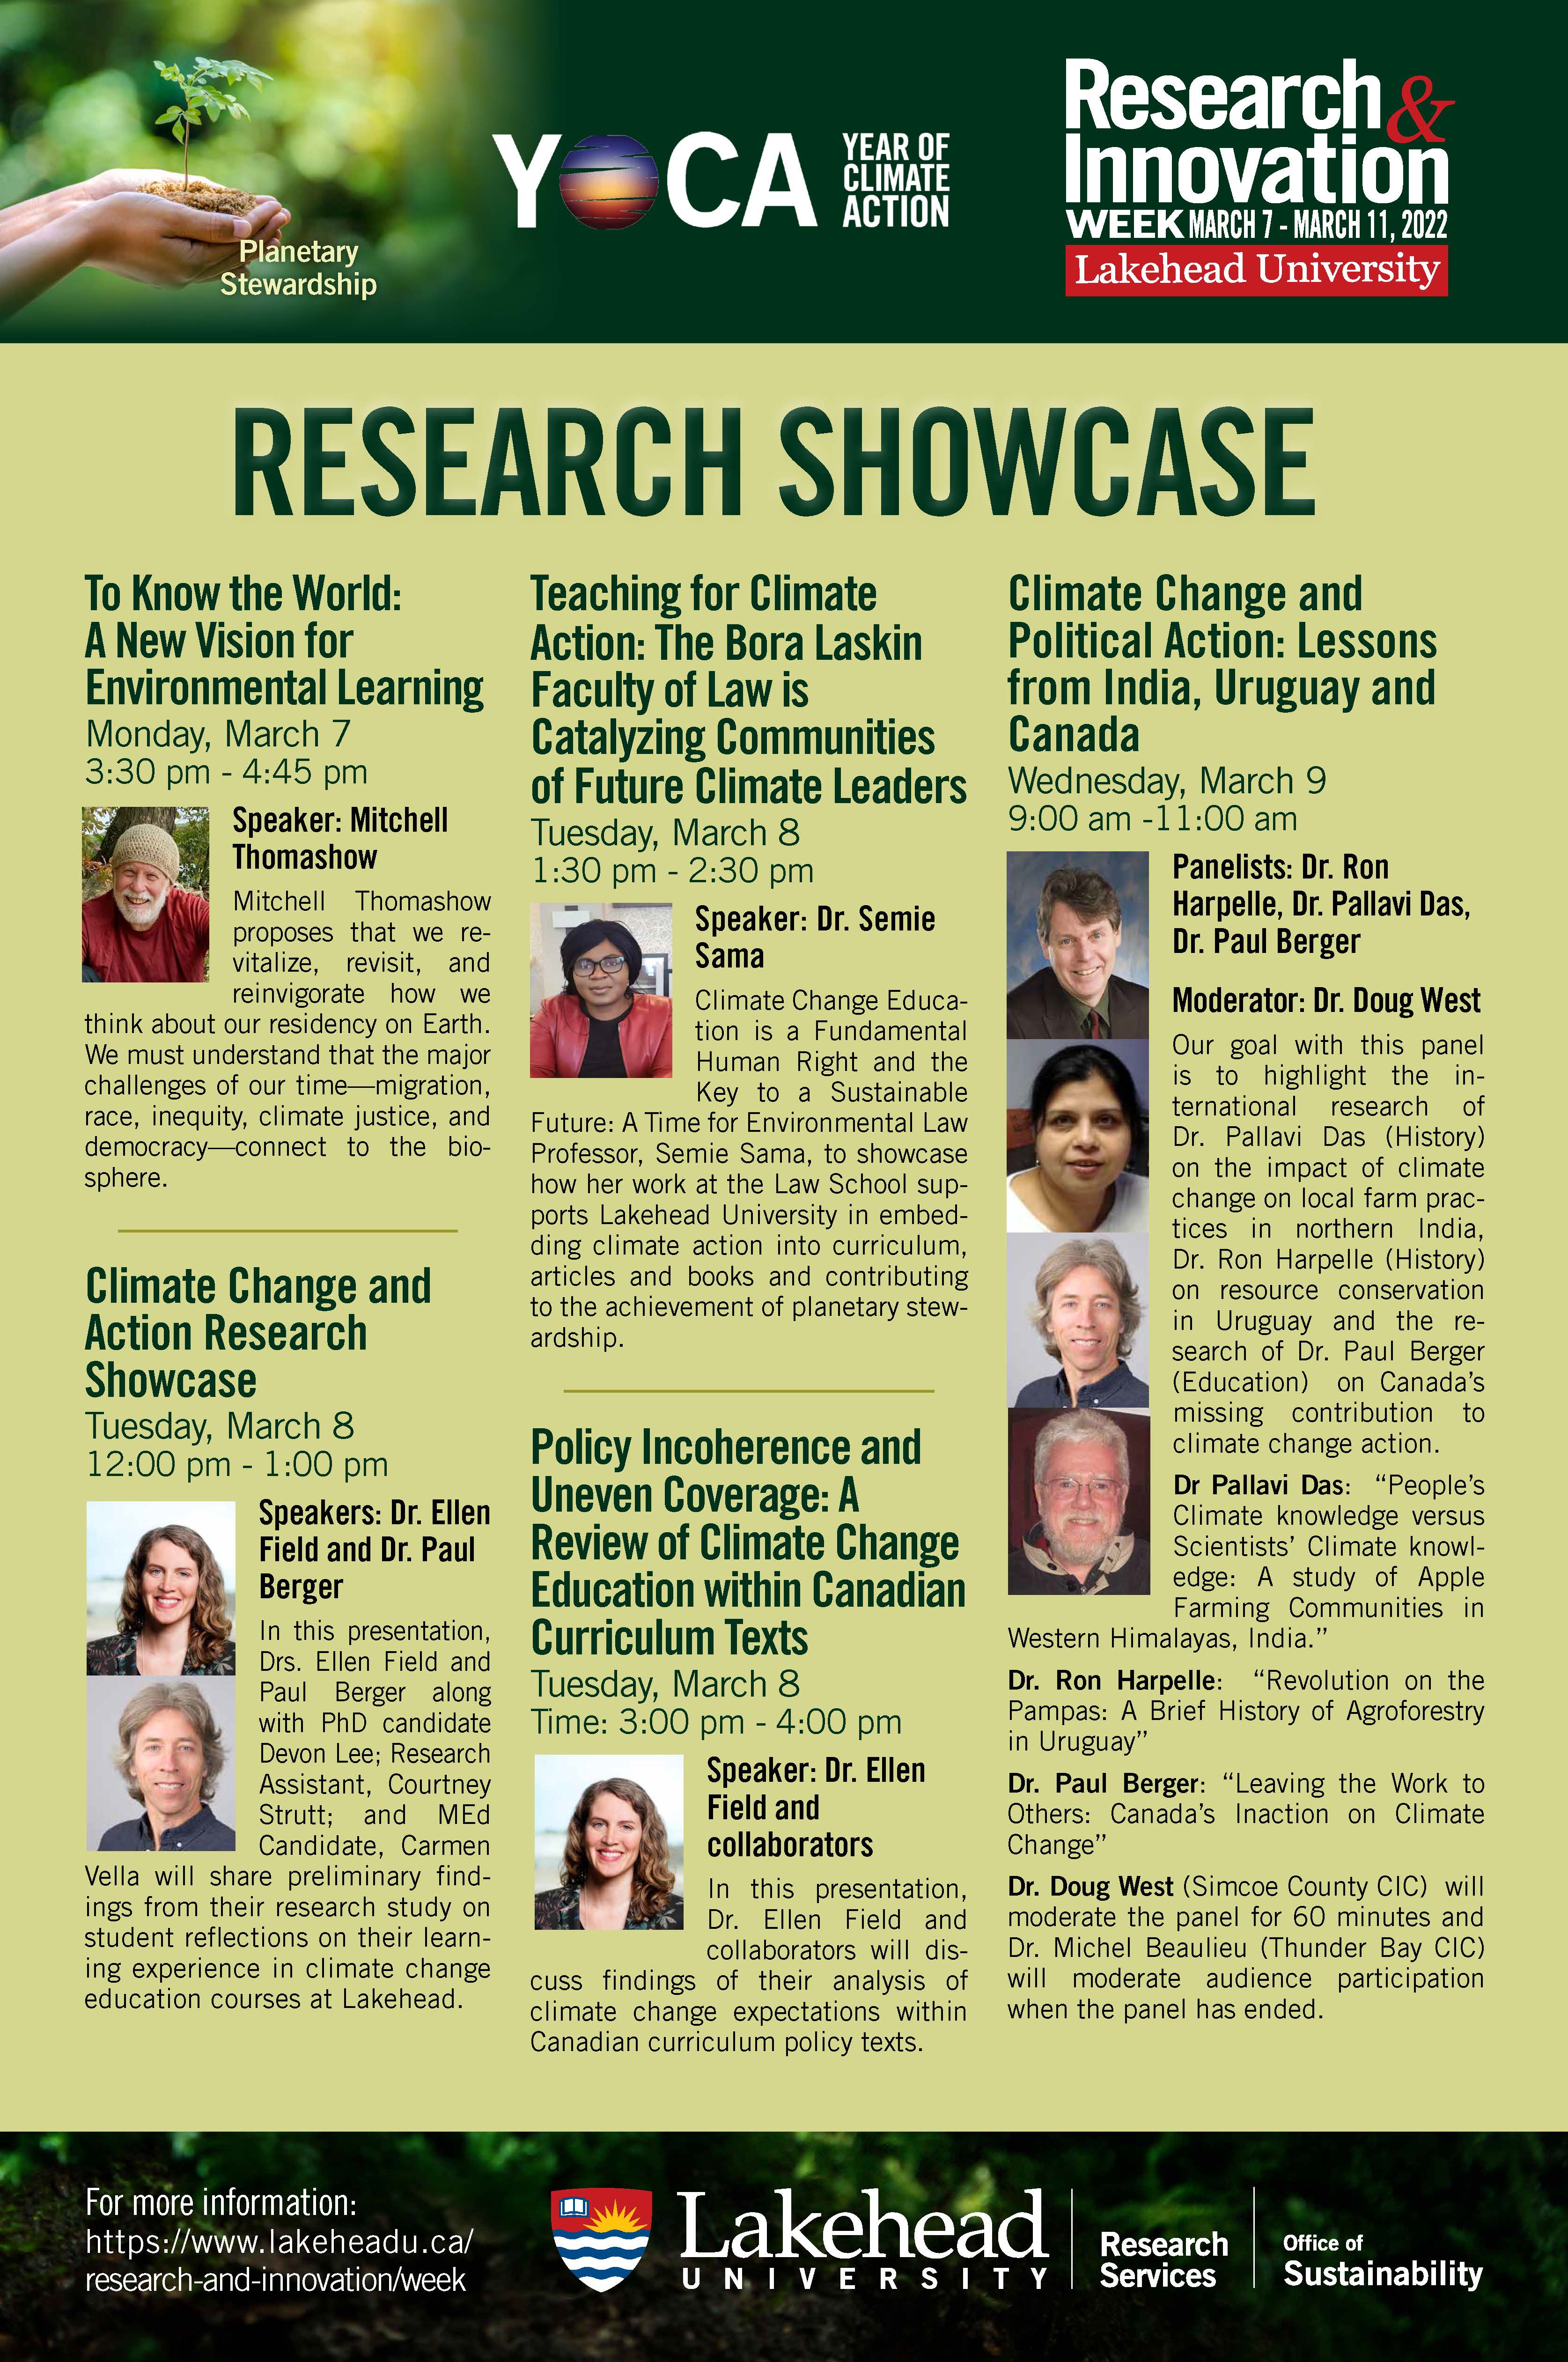 Climate Change and Action Research Showcase Poster